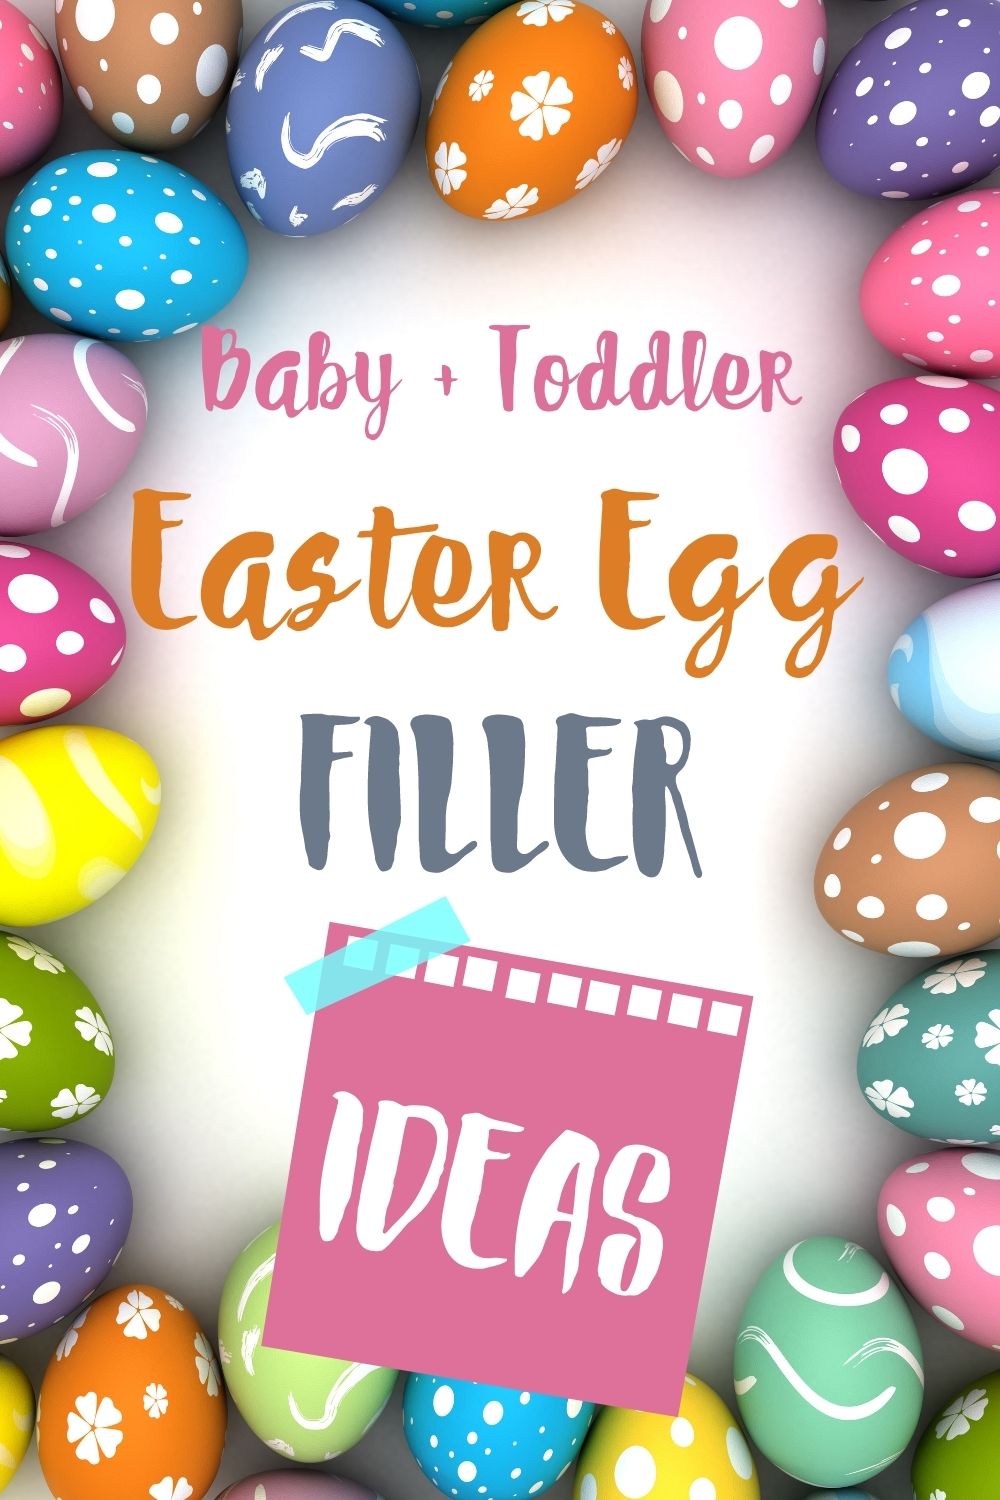 29 Easter egg fillers for babies + toddlers - Celebrating with kids